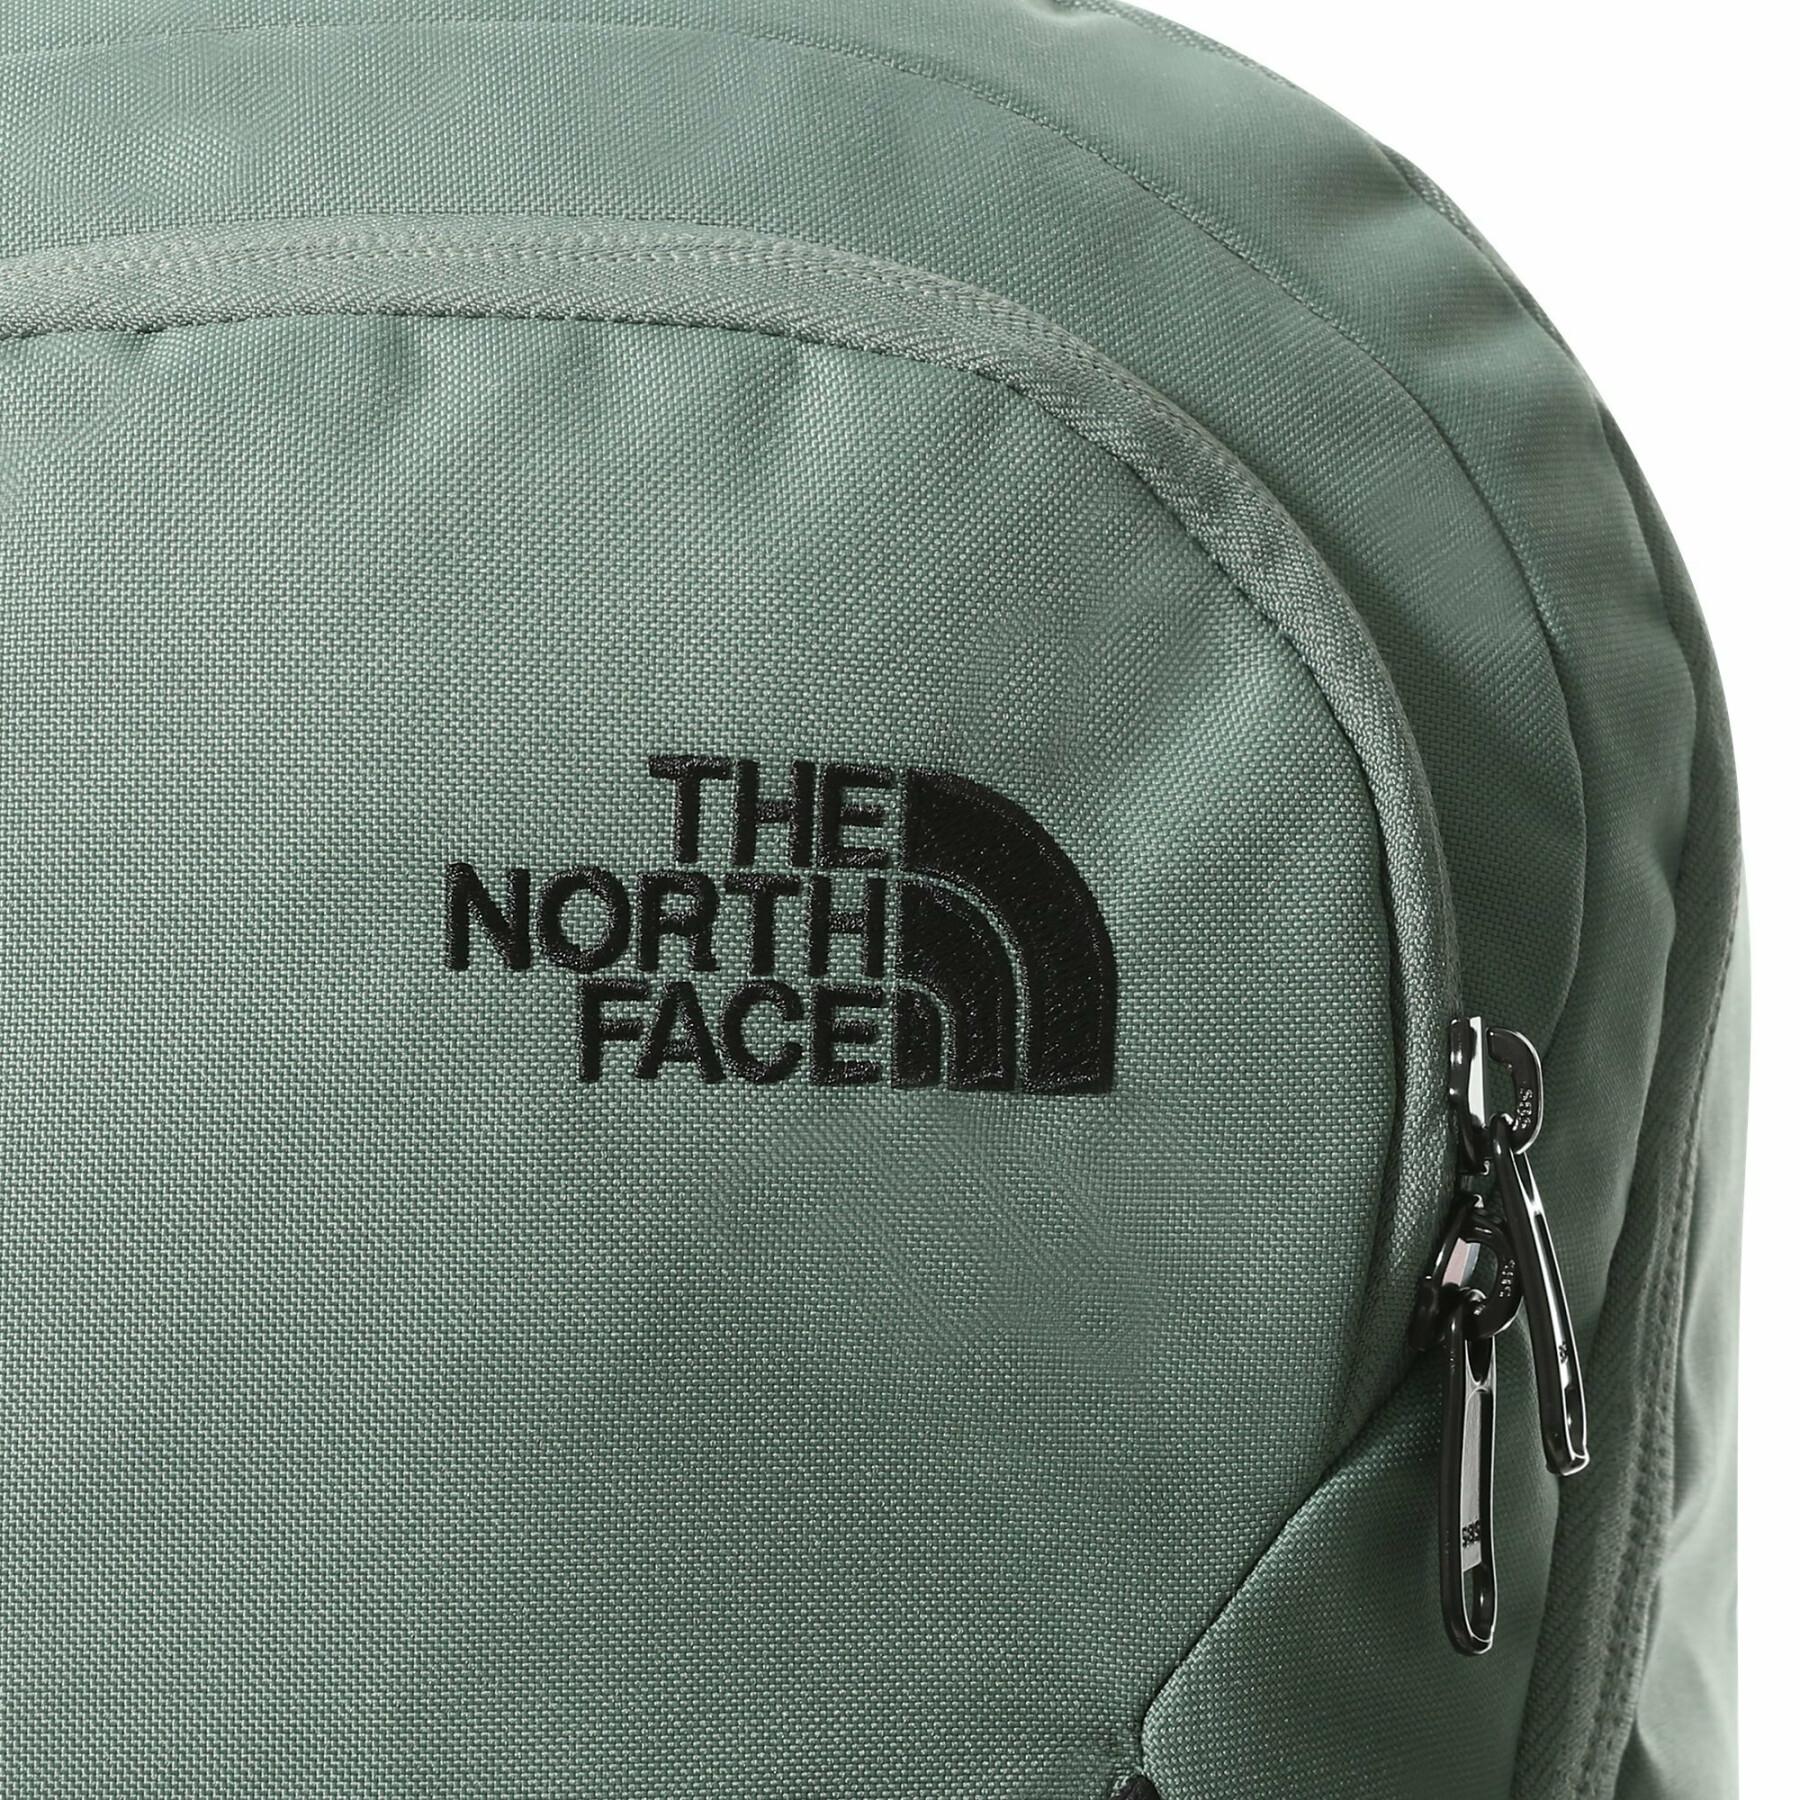 Mochila The North Face Rodey